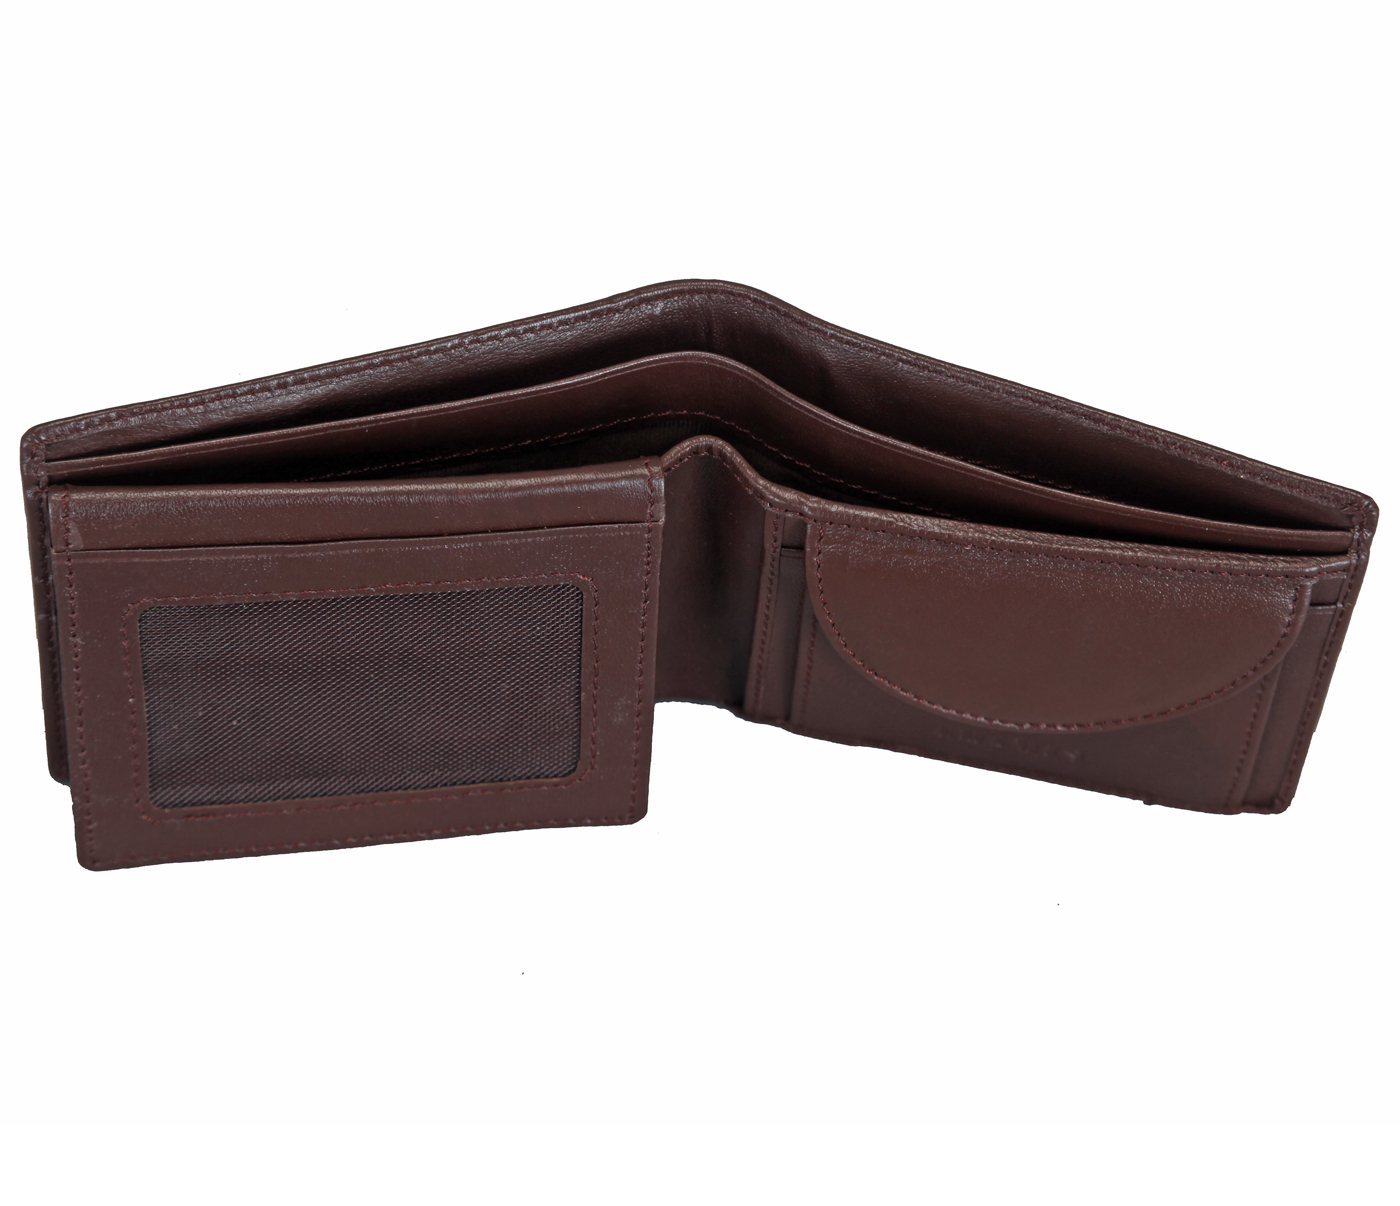 W256-Hudson-Men's bifold wallet with coin pocket in Genuine Leather - Brown.